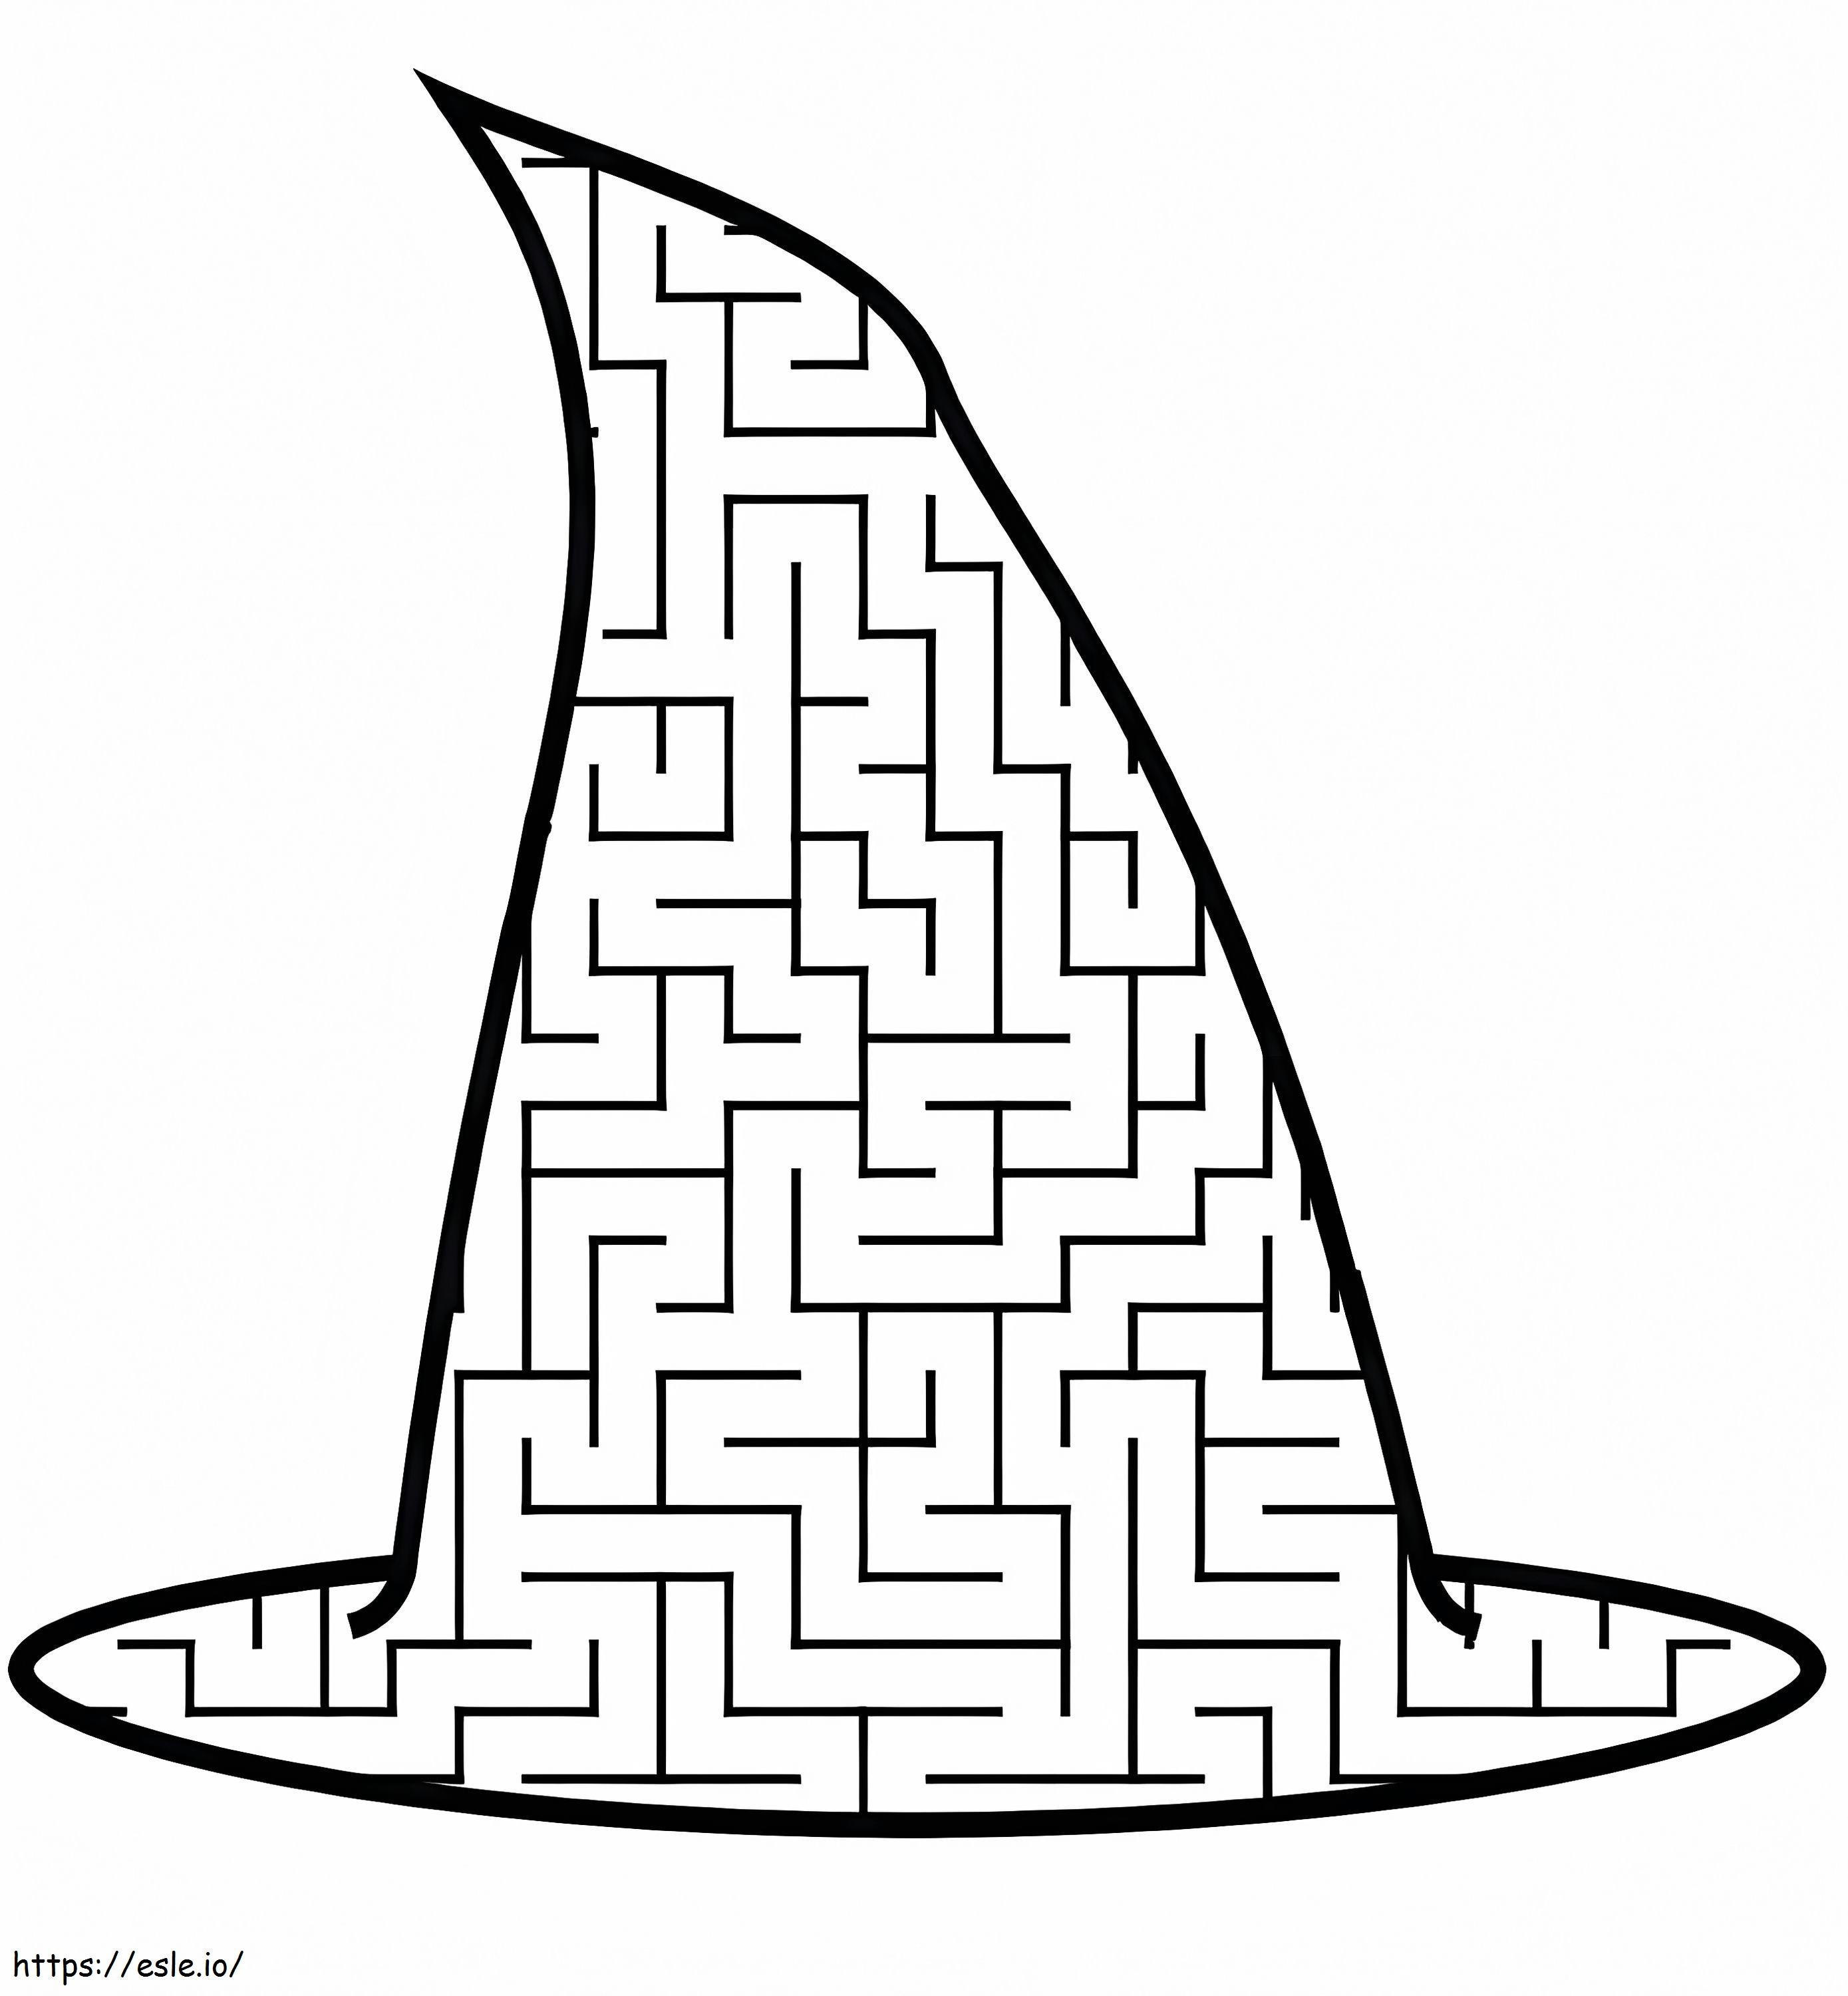 Witch Hat Maze coloring page